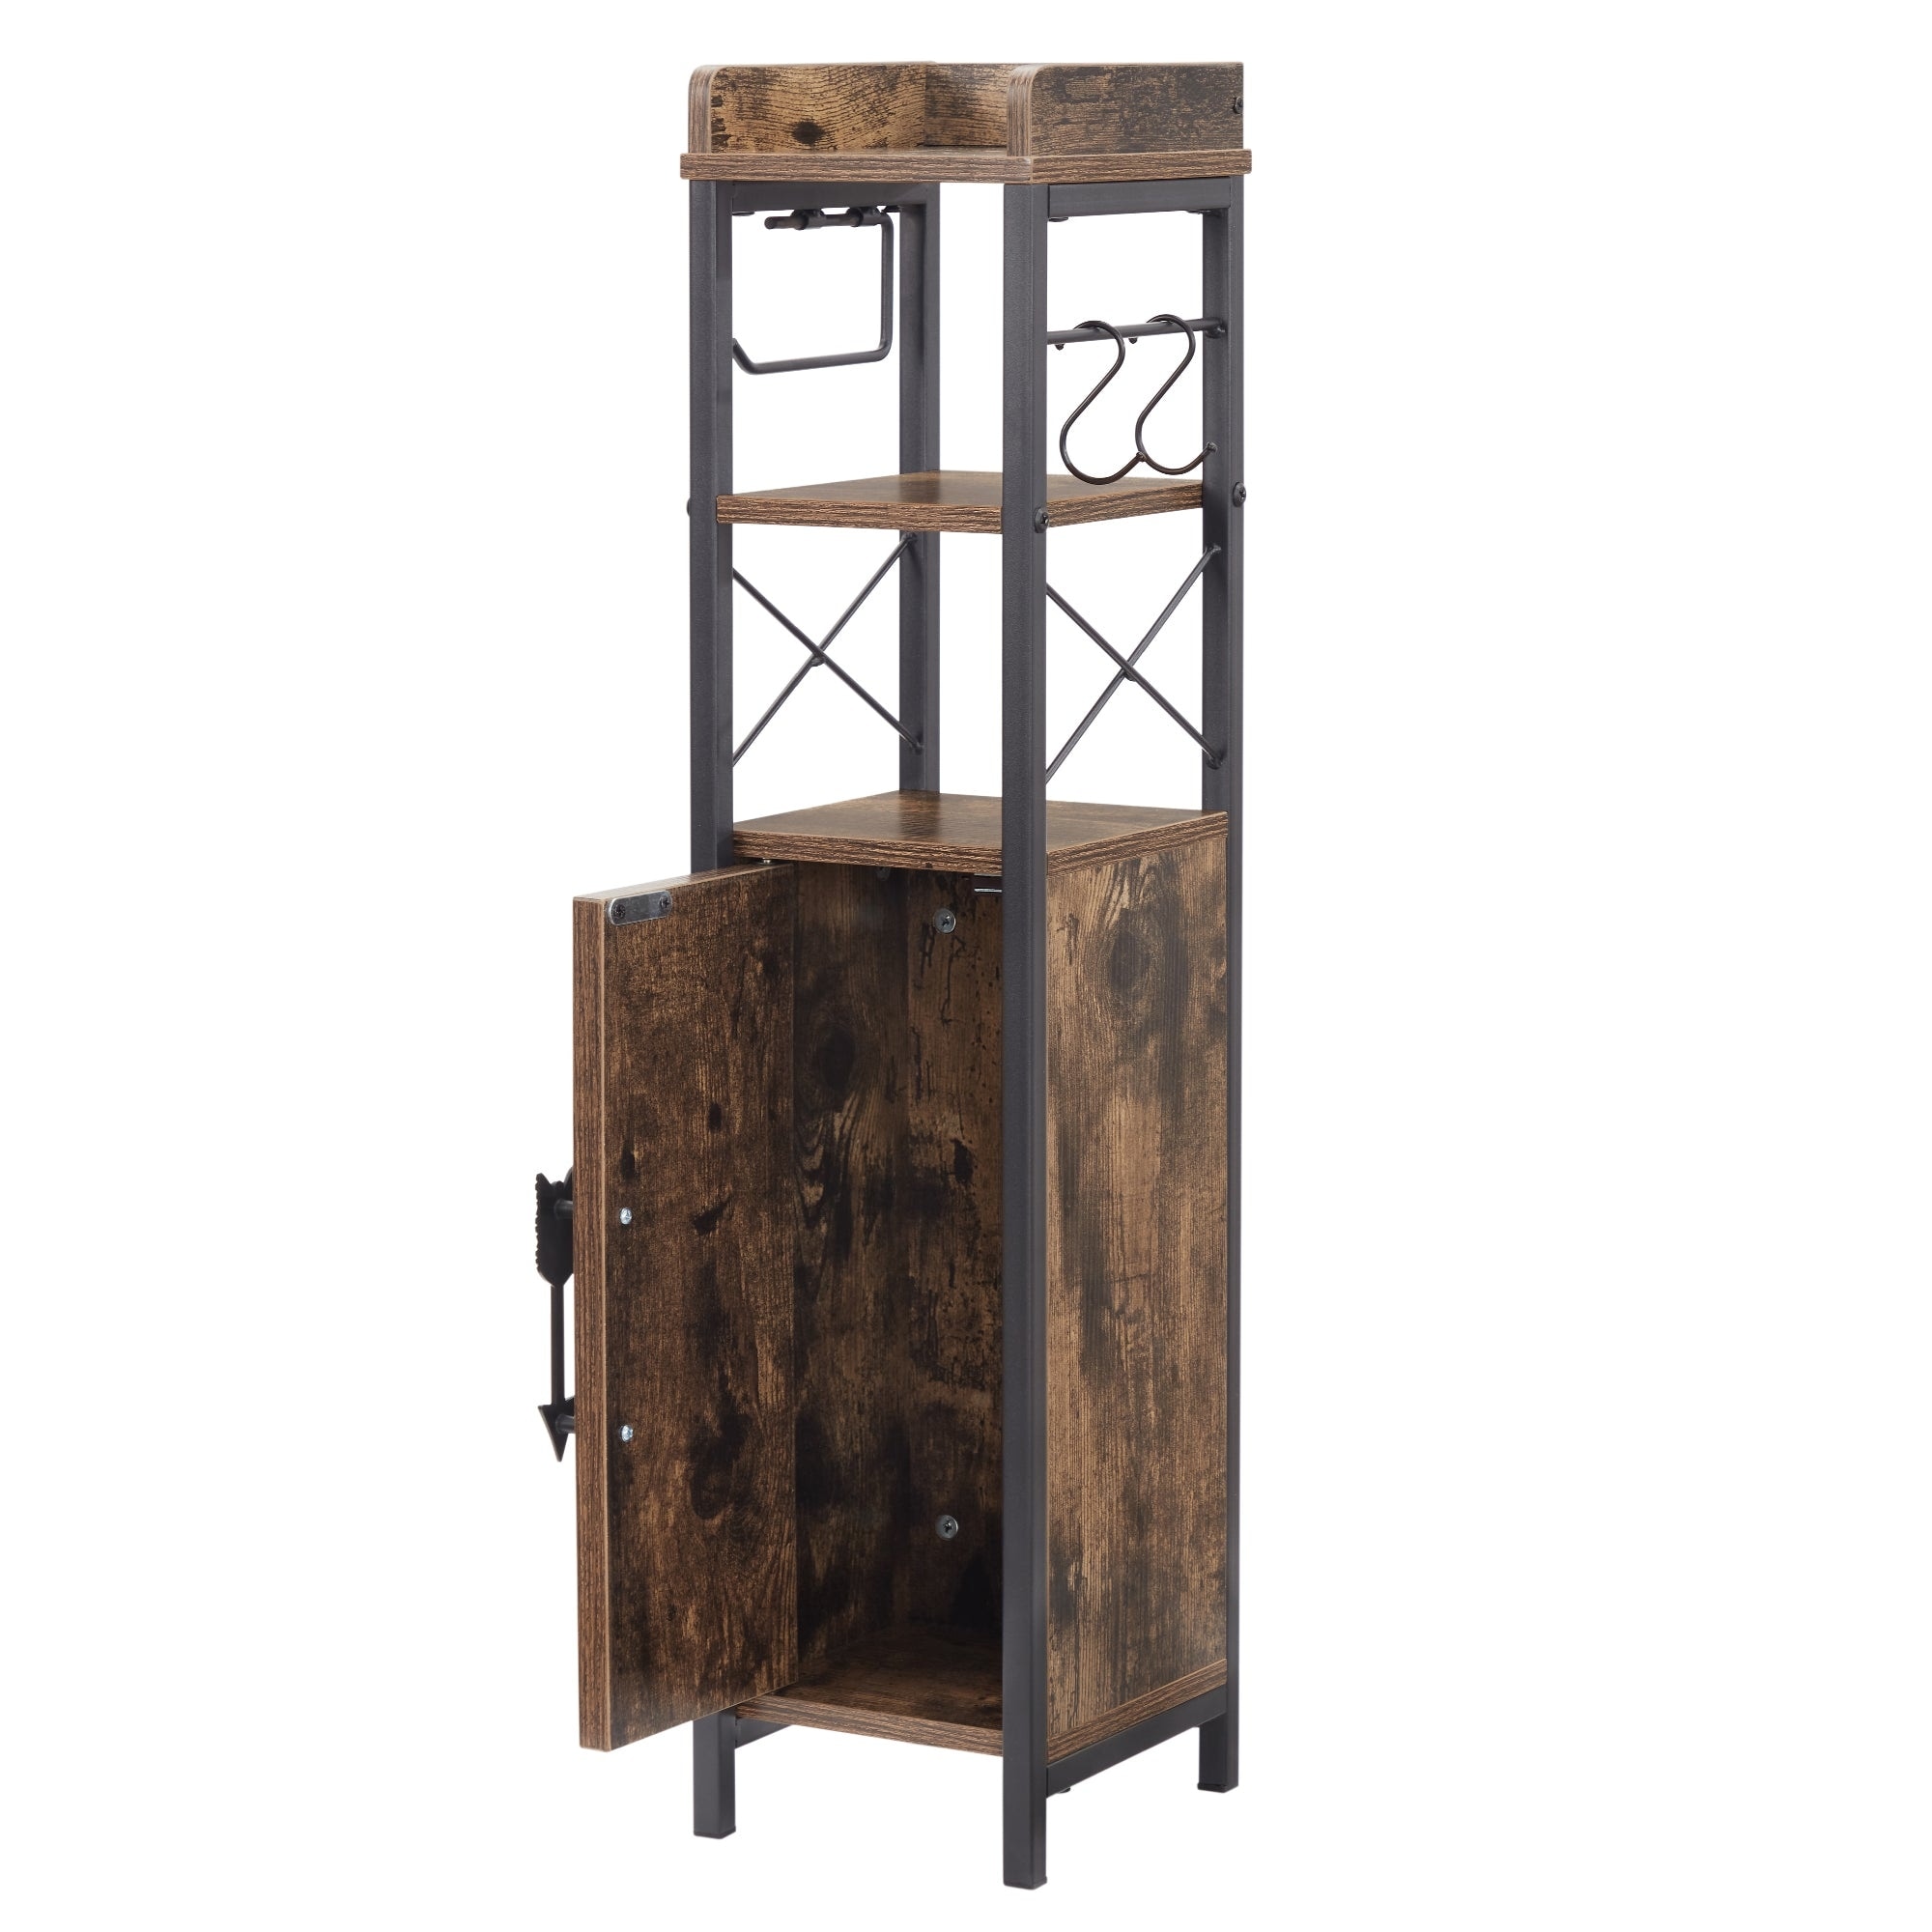 https://ak1.ostkcdn.com/images/products/is/images/direct/ceef0c30082547d2f75f37af2e5b680a3279d462/Wood-Tall-Bathroom-Linen-Cabinet-Small-Bathroom-Storage-Corner-Floor-Cabinet-with-Doors-and-Shelves-Toilet-Paper-Holder.jpg